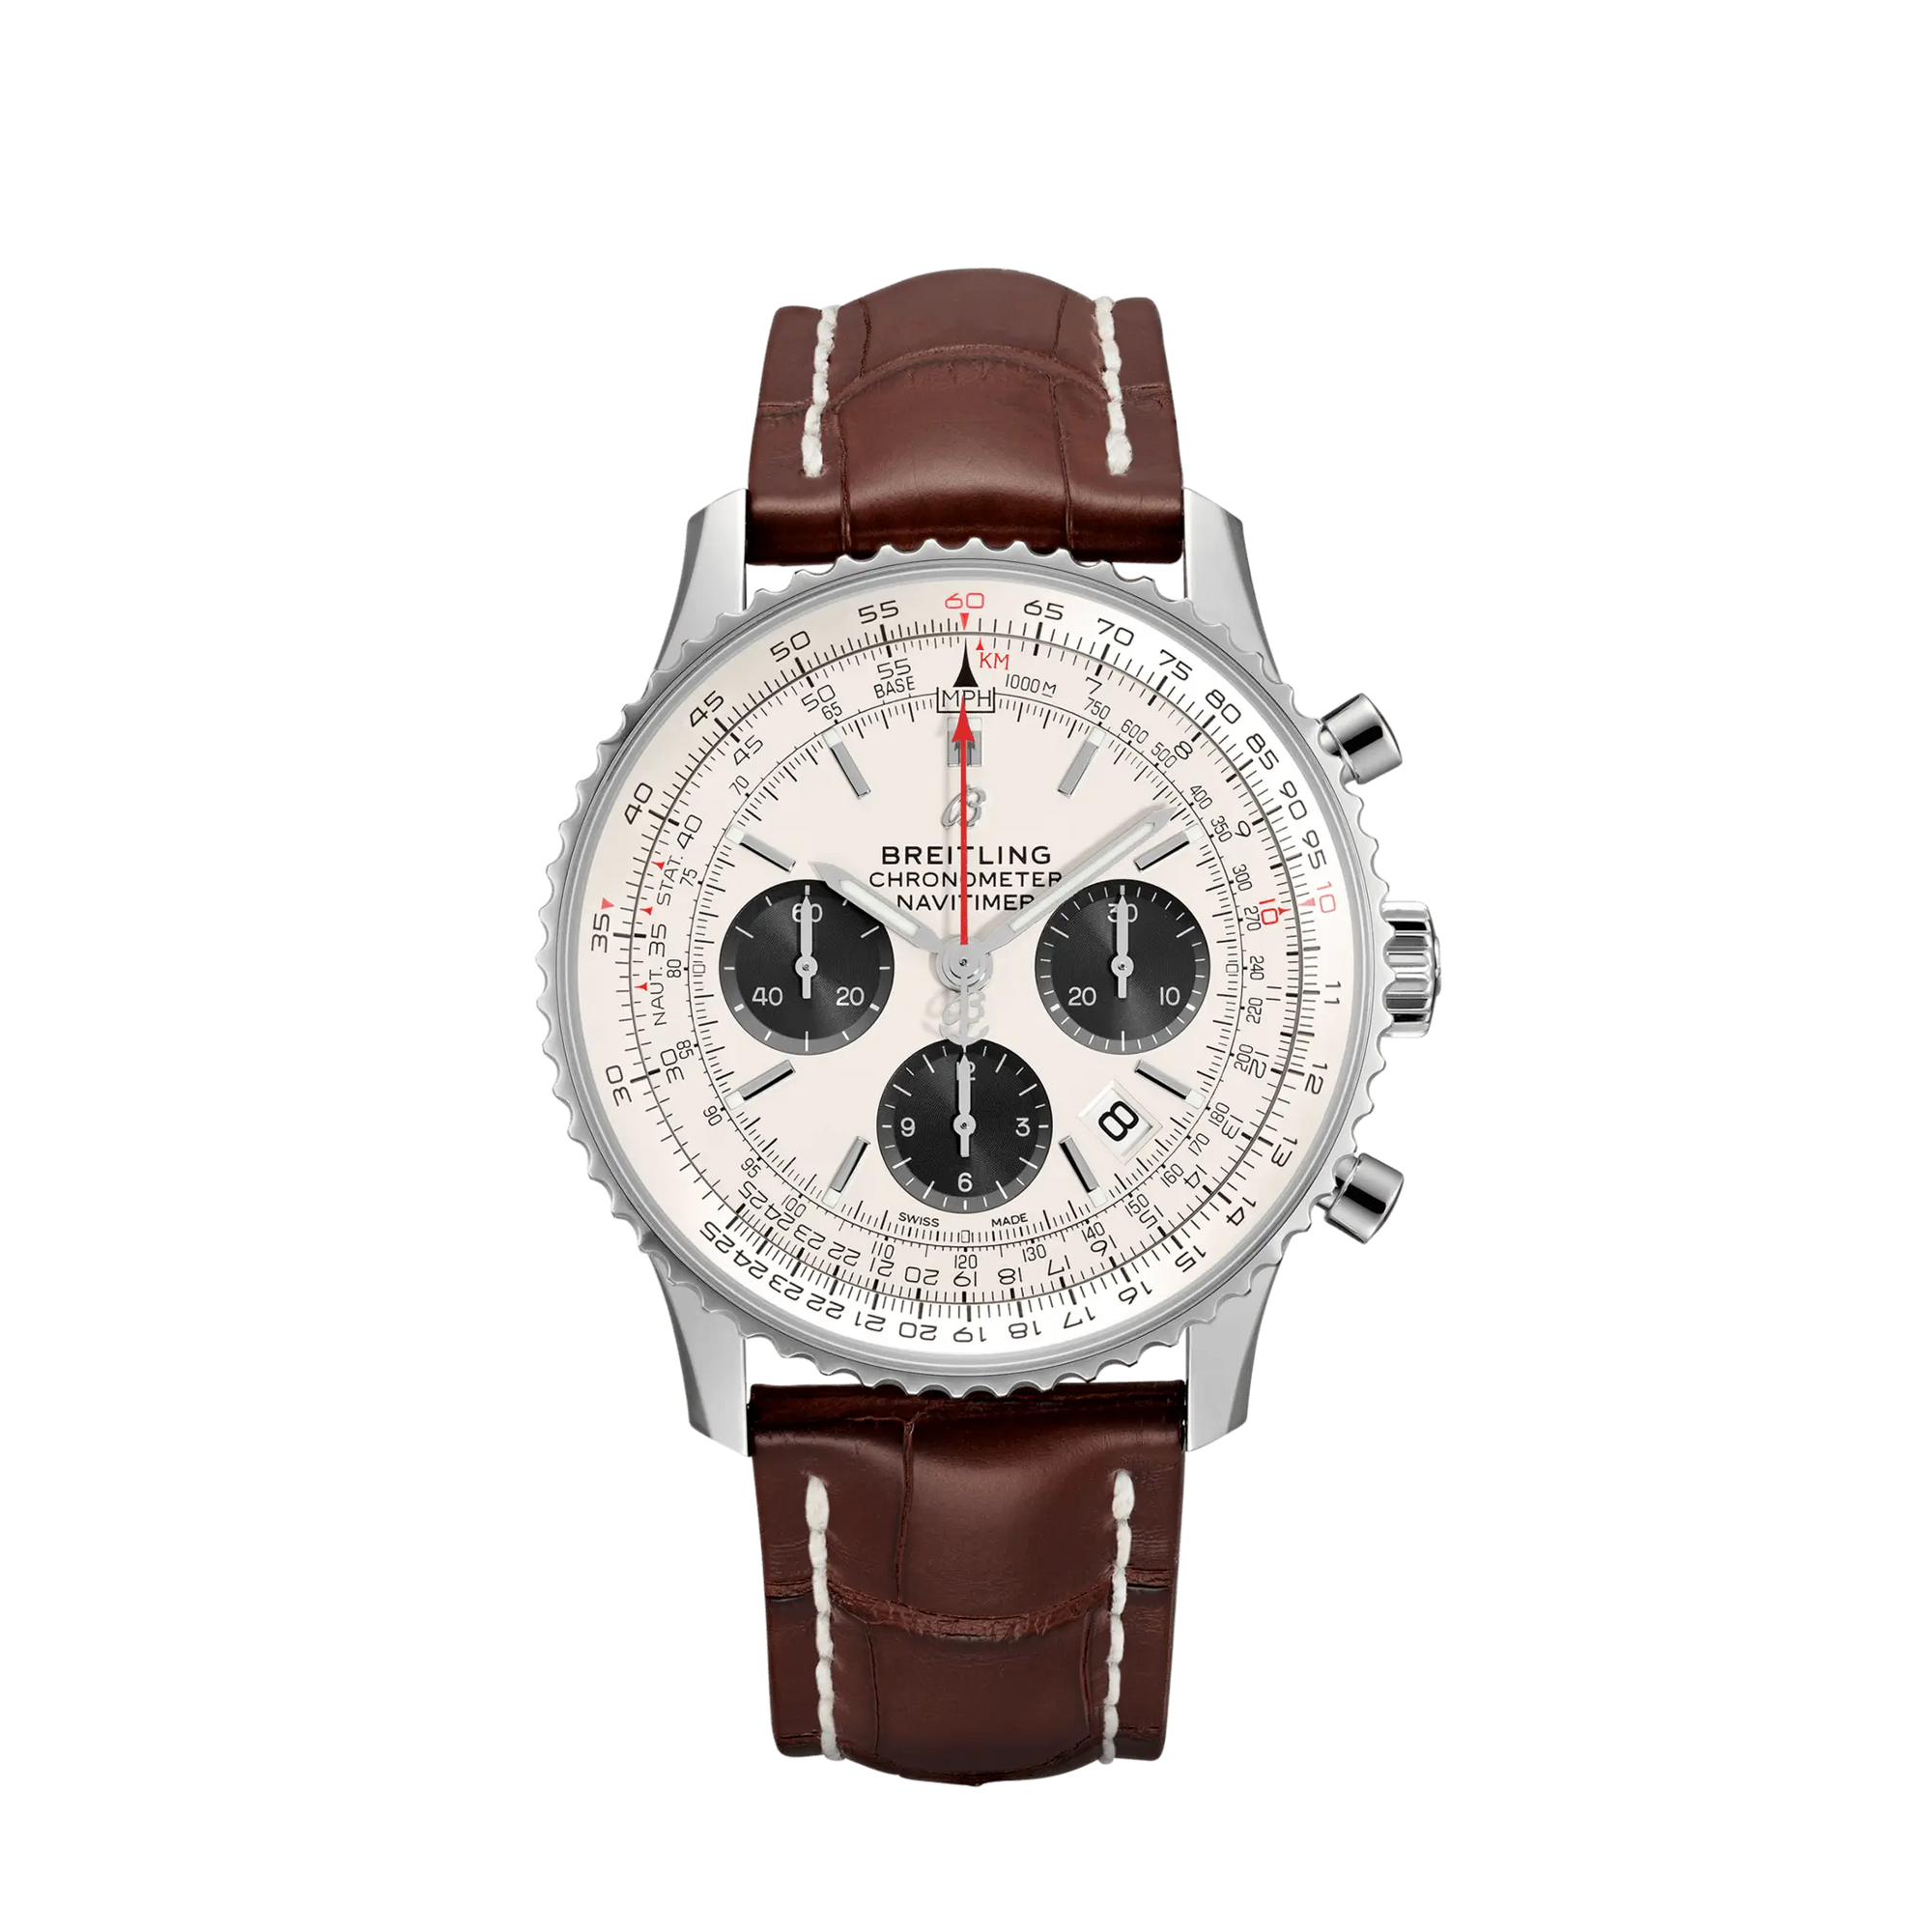 Breitling NAVITIMER B01 CHRONOGRAPH 43 wrist watch with red seconds hand